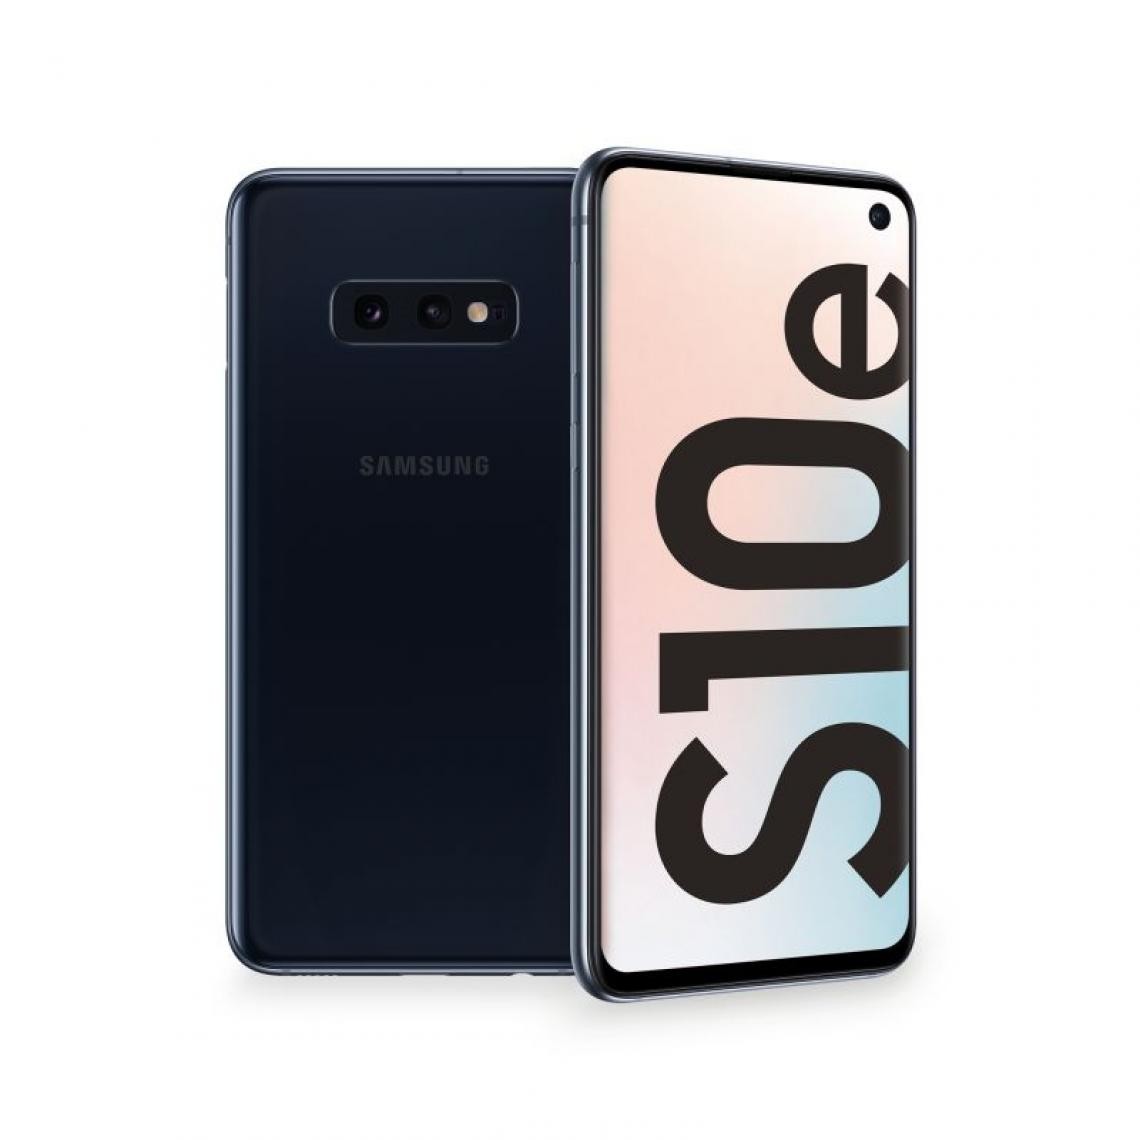 Inconnu - Samsung Galaxy S10e SM-G970F/DS 14,7 cm (5.8``) Double SIM hybride Android 9.0 4G USB Type-C 6 Go 128 Go 3100 mAh Noir - Smartphone Android